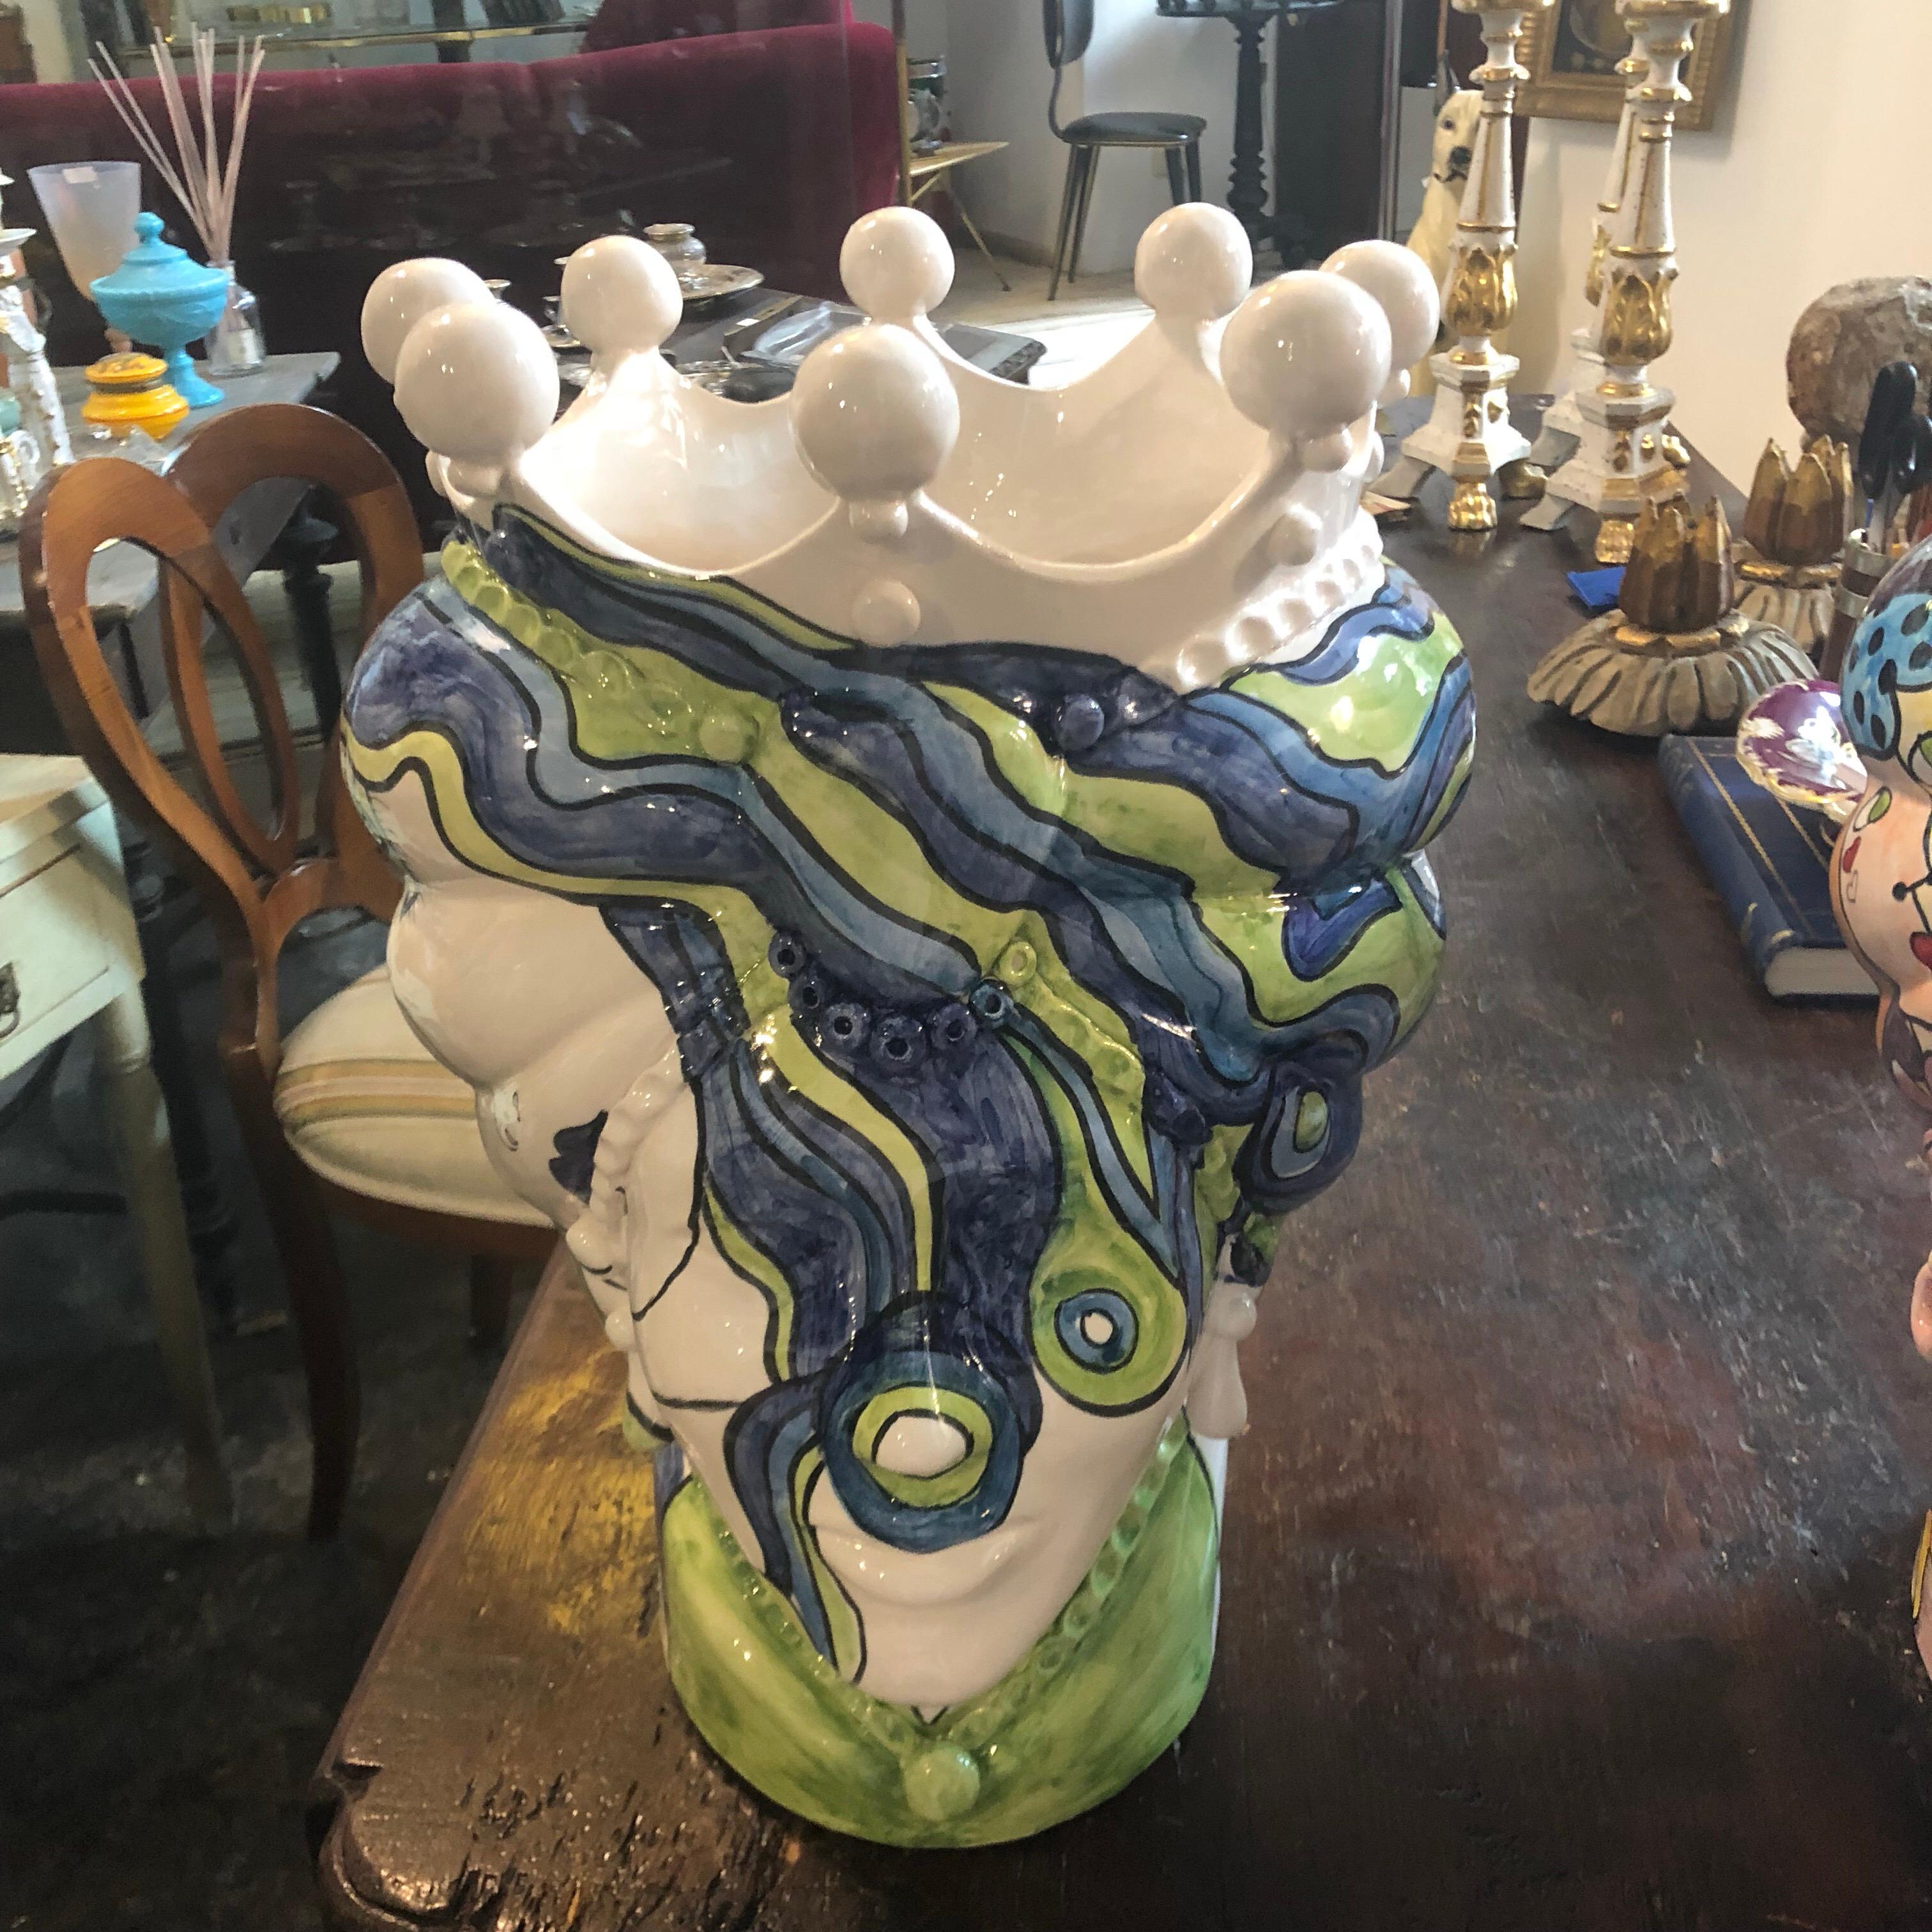 It's an amazing pair of white clay Sicilian Moro's head vases, interpreted in a pop art style by a Sicilian young painter, signed 1/1 MR on the base. There are no copies of these, they are unique pieces. The legend of the Sicilian Moro's heads